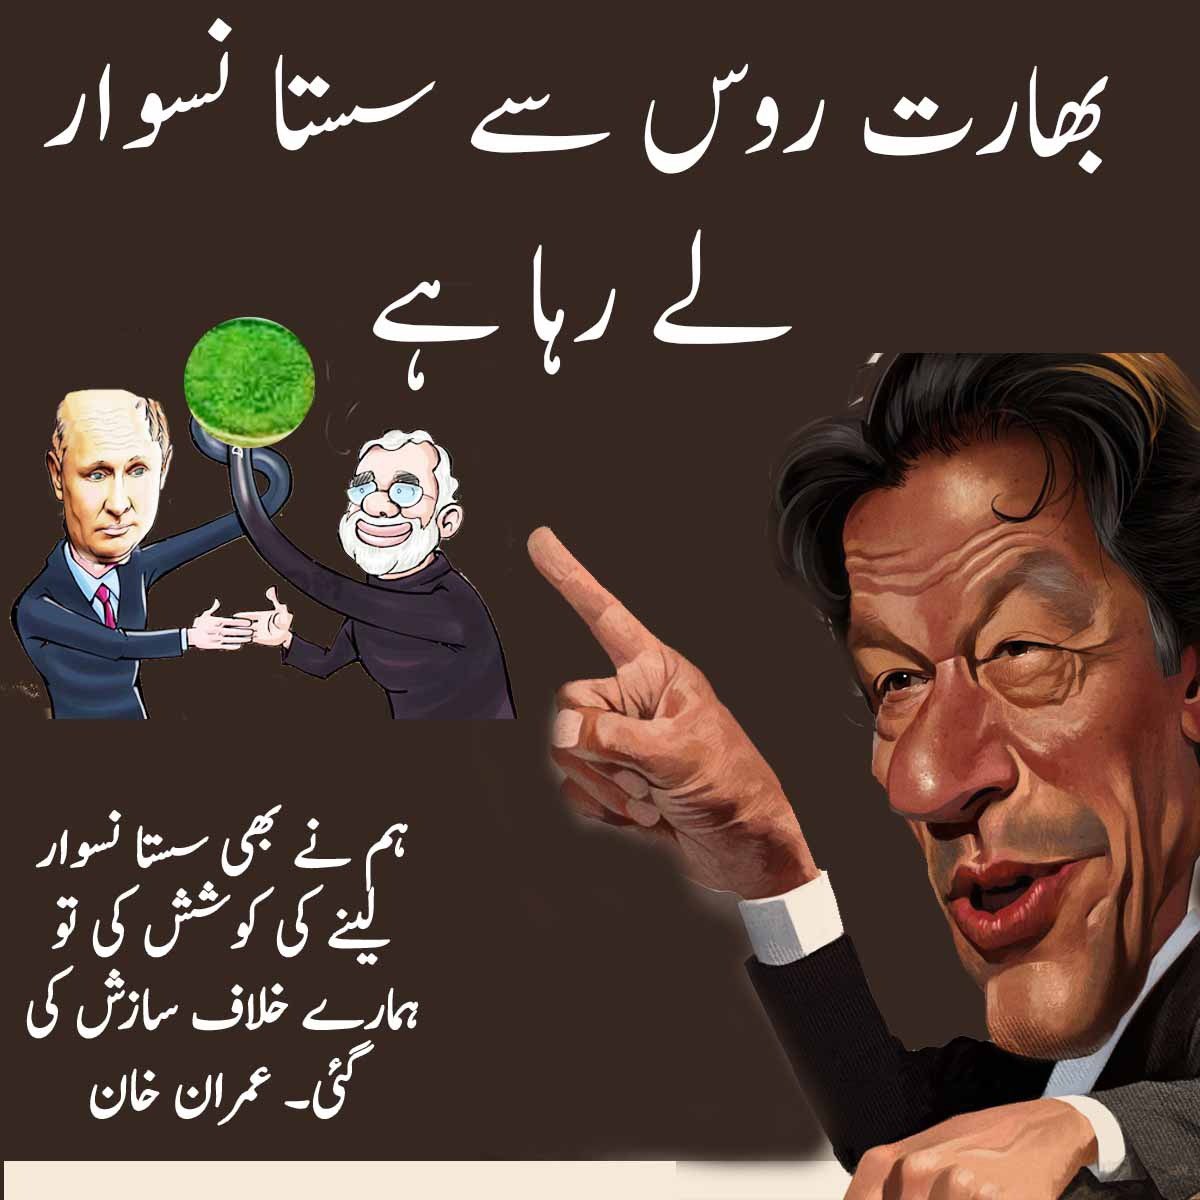 India is getting cheap snuff from Russia. When we also tried to get cheap snuff, a conspiracy was hatched against us. Imran Khan

#NaswarKoSastaKaro